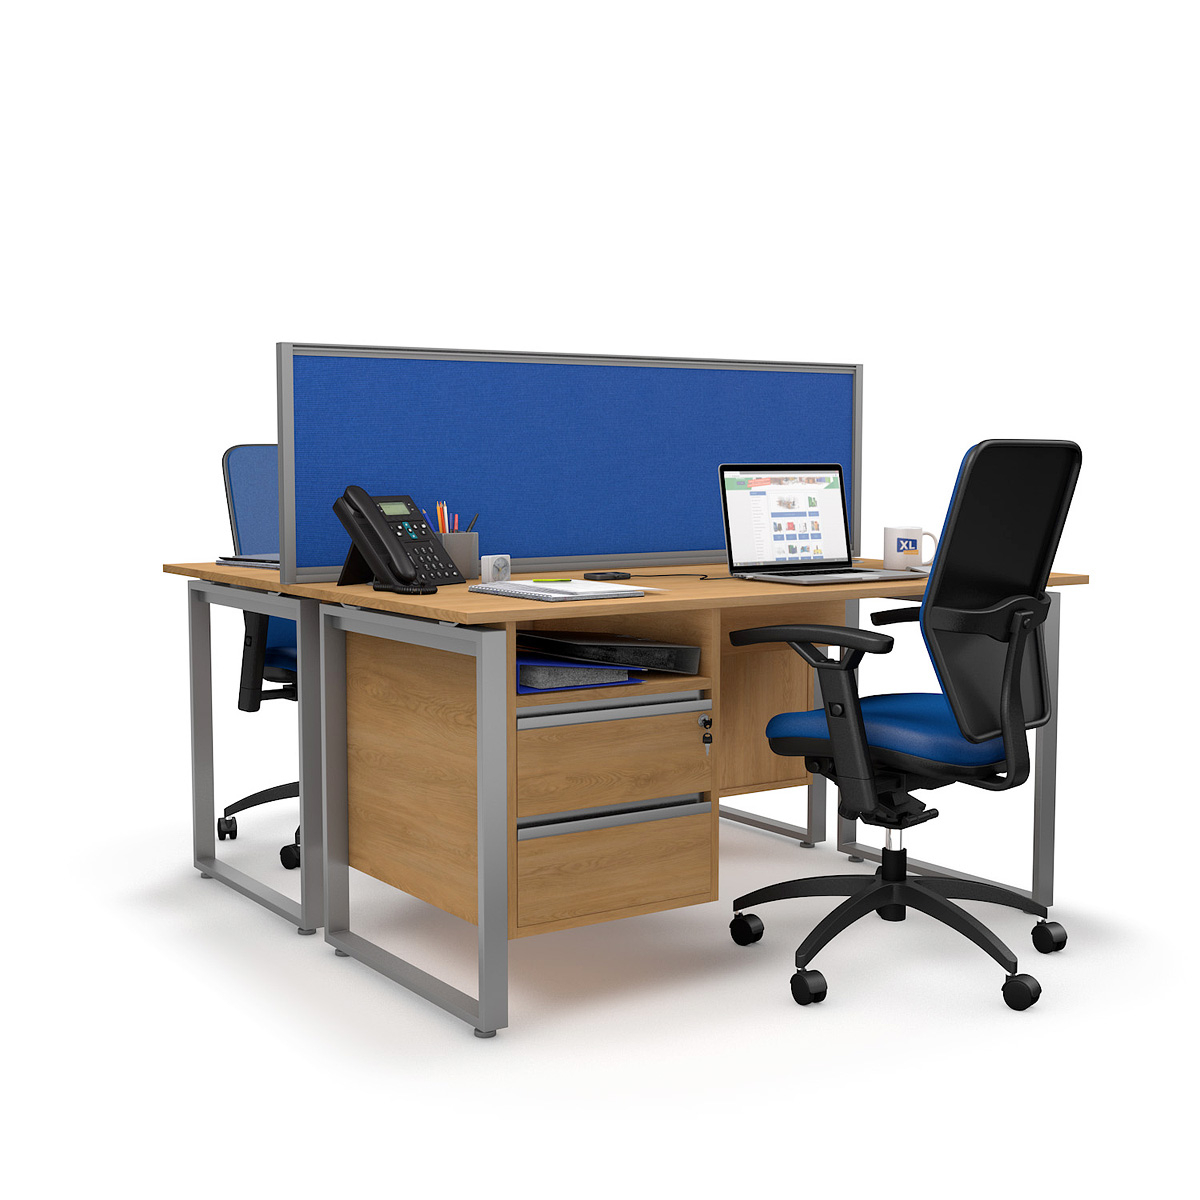 FRONTIER® Office Desk Screens With Blue Fabric - Supplied With Two Clamps For 17-33mm Thick Desks